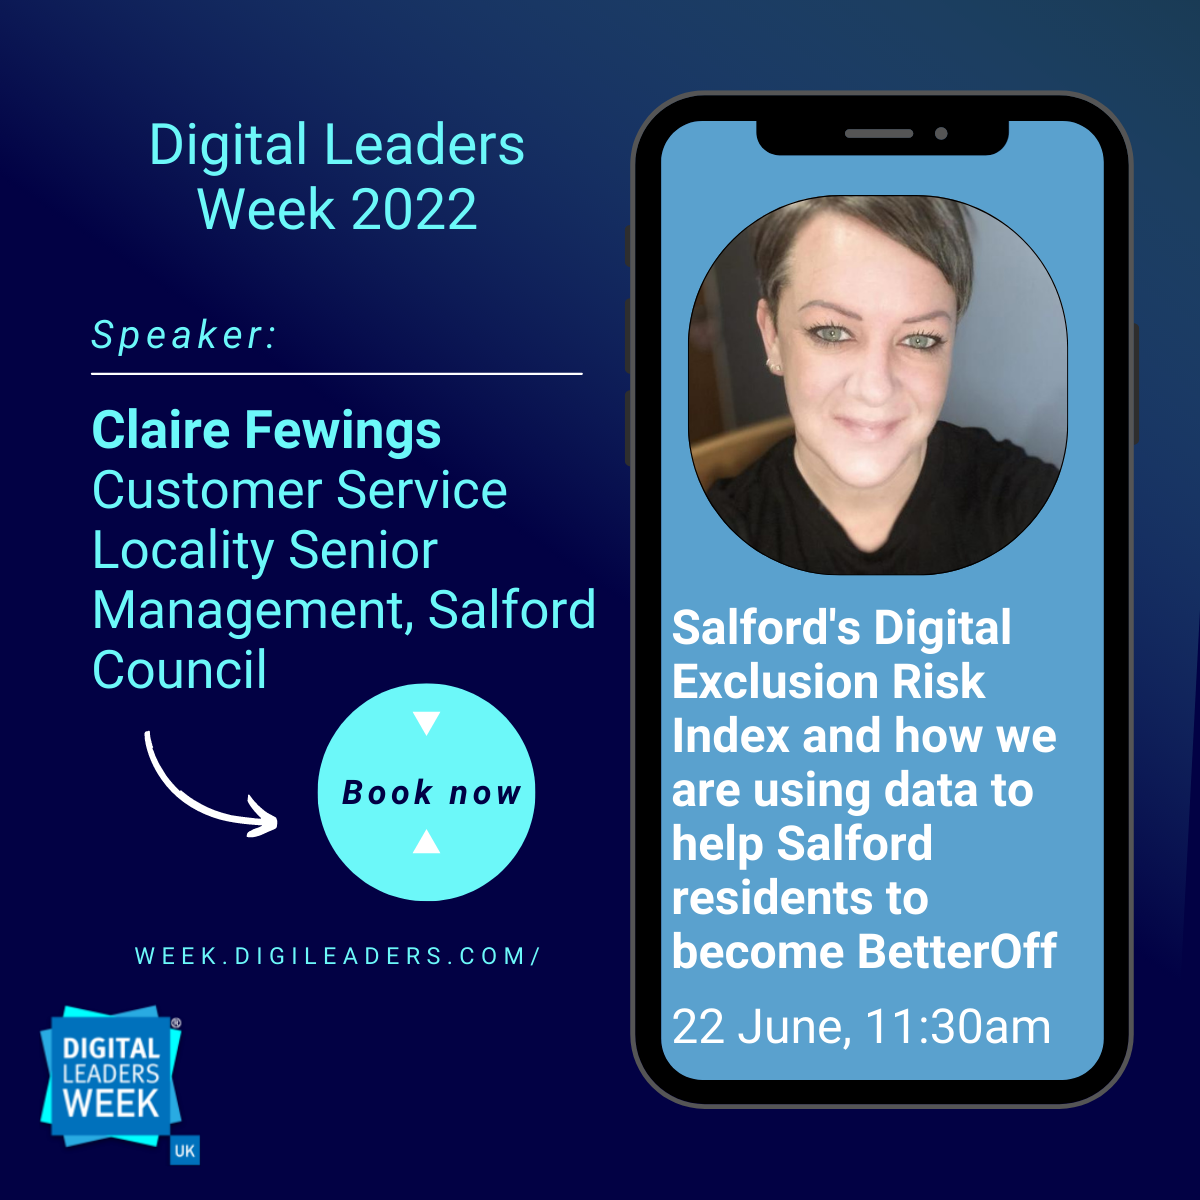 Claire Fewings - Salford's digital exclusion risk index and how we are using data to help Salford residents to become BetterOff